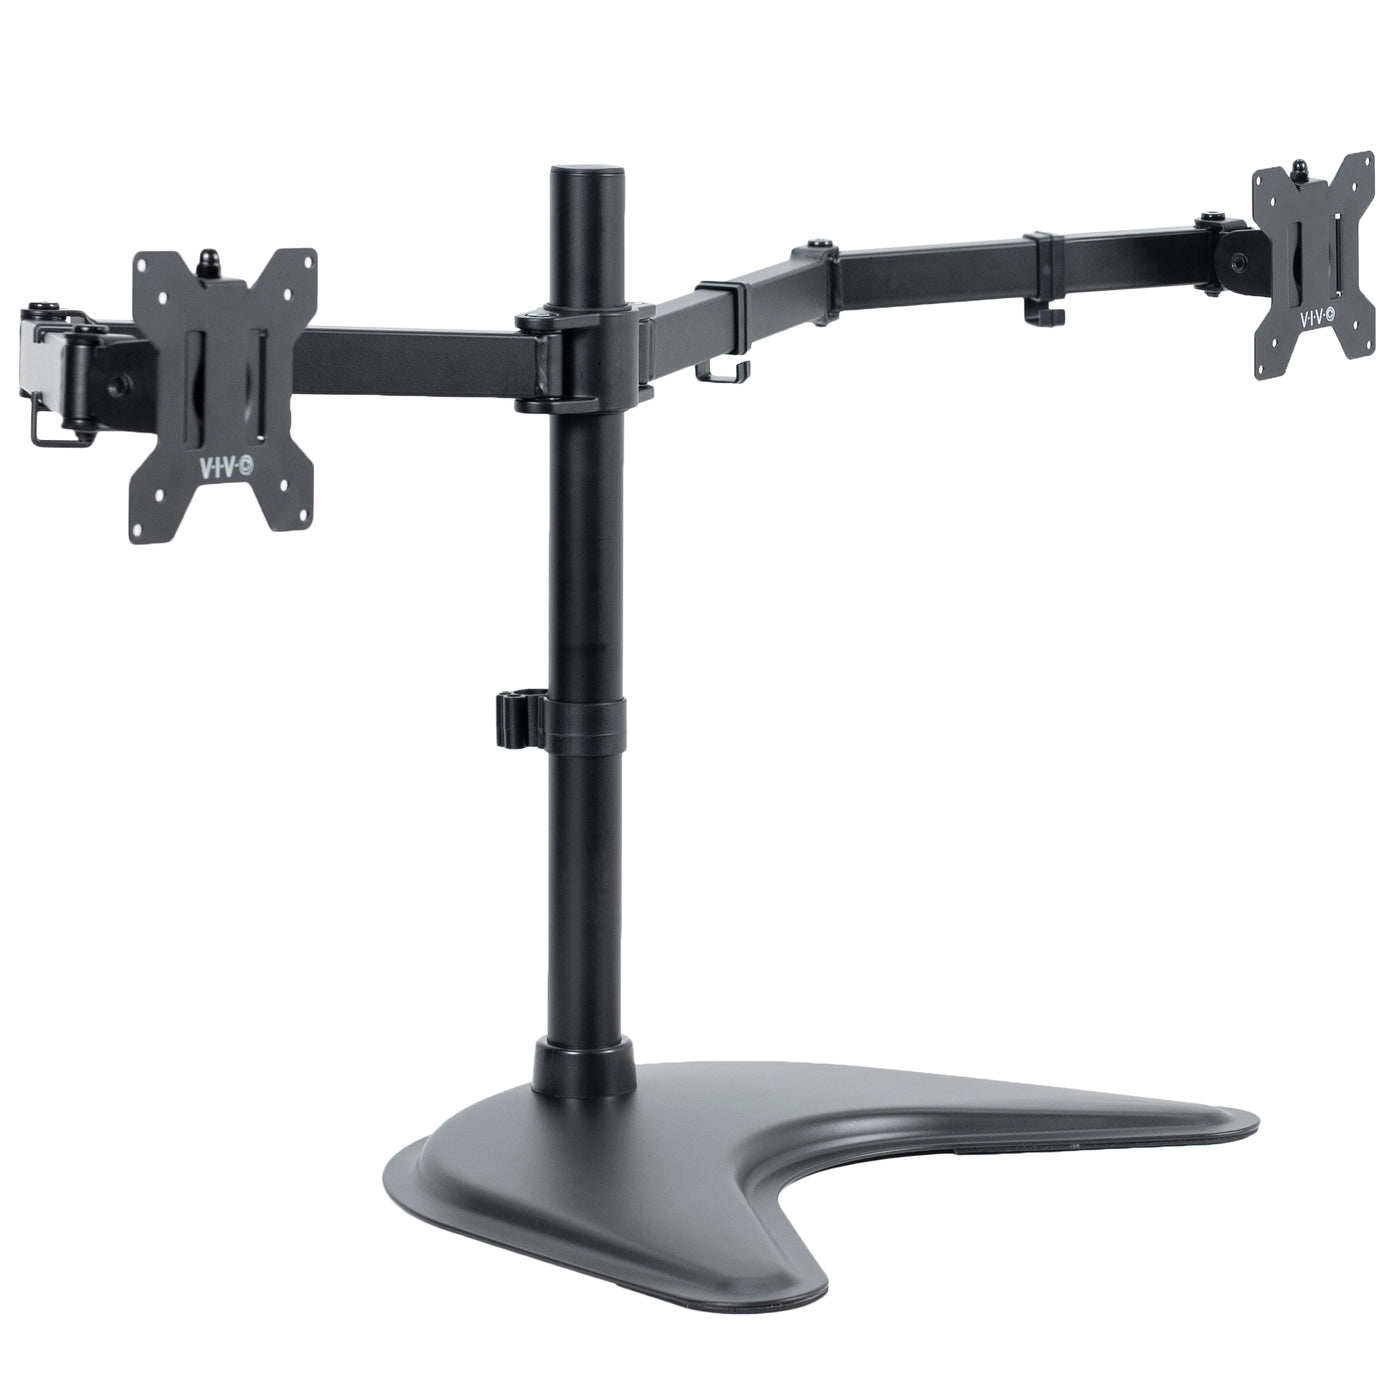 Dual Monitor Desk Stand for up to 27" Screens